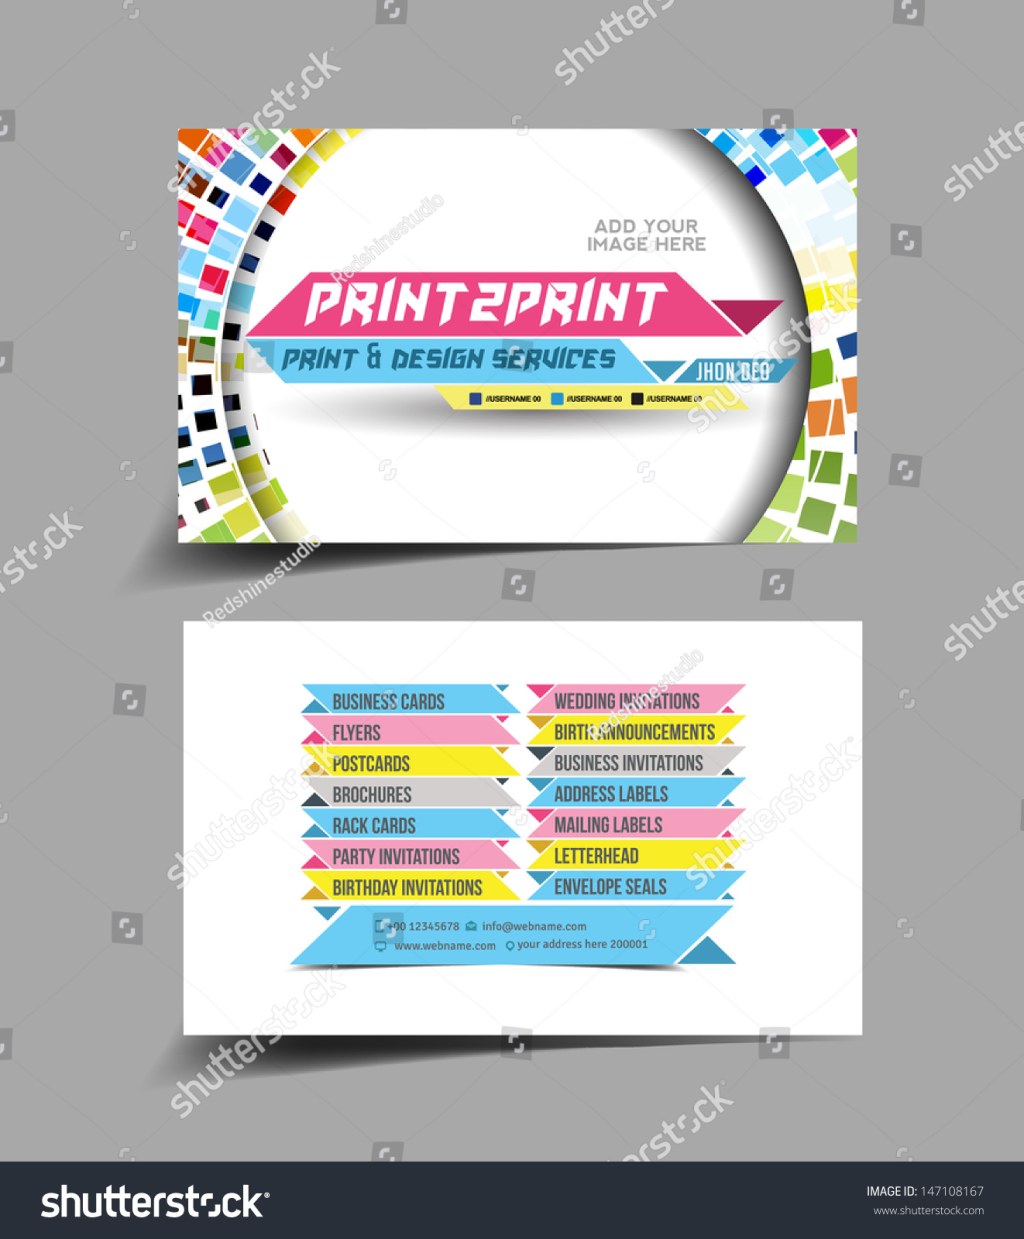 printing business visiting card design - , Printing Press Business Cards Images, Stock Photos & Vectors